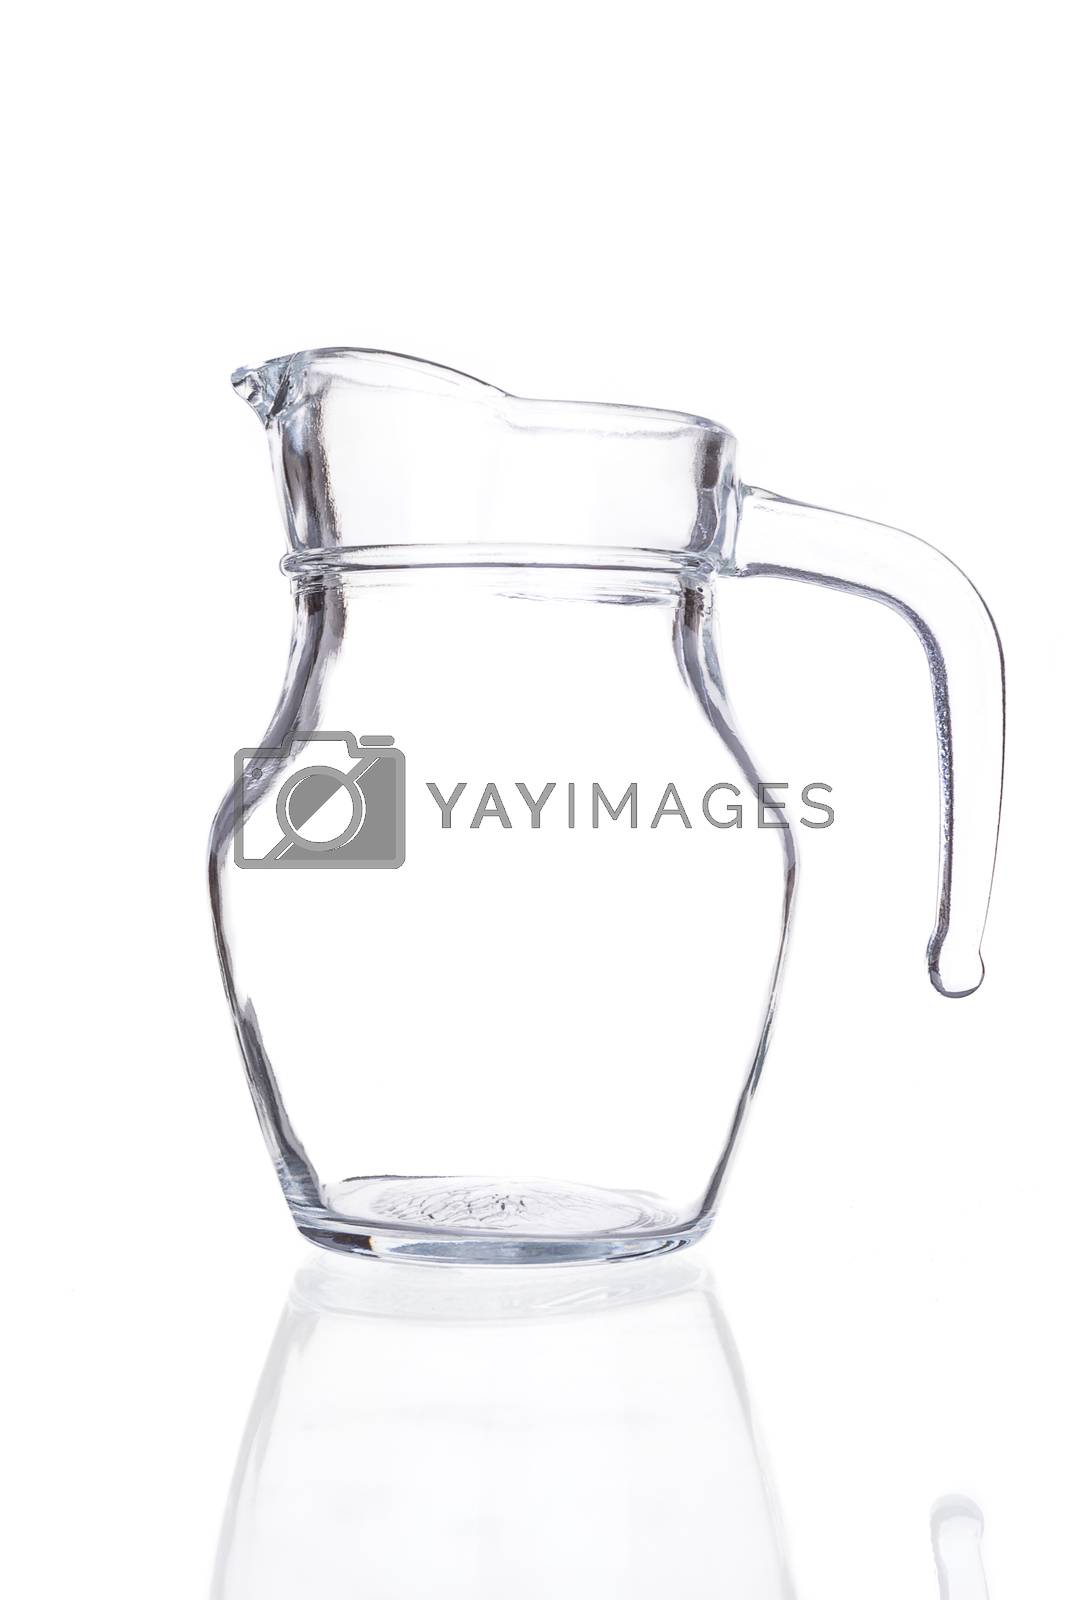 Royalty free image of Pitcher by utah778